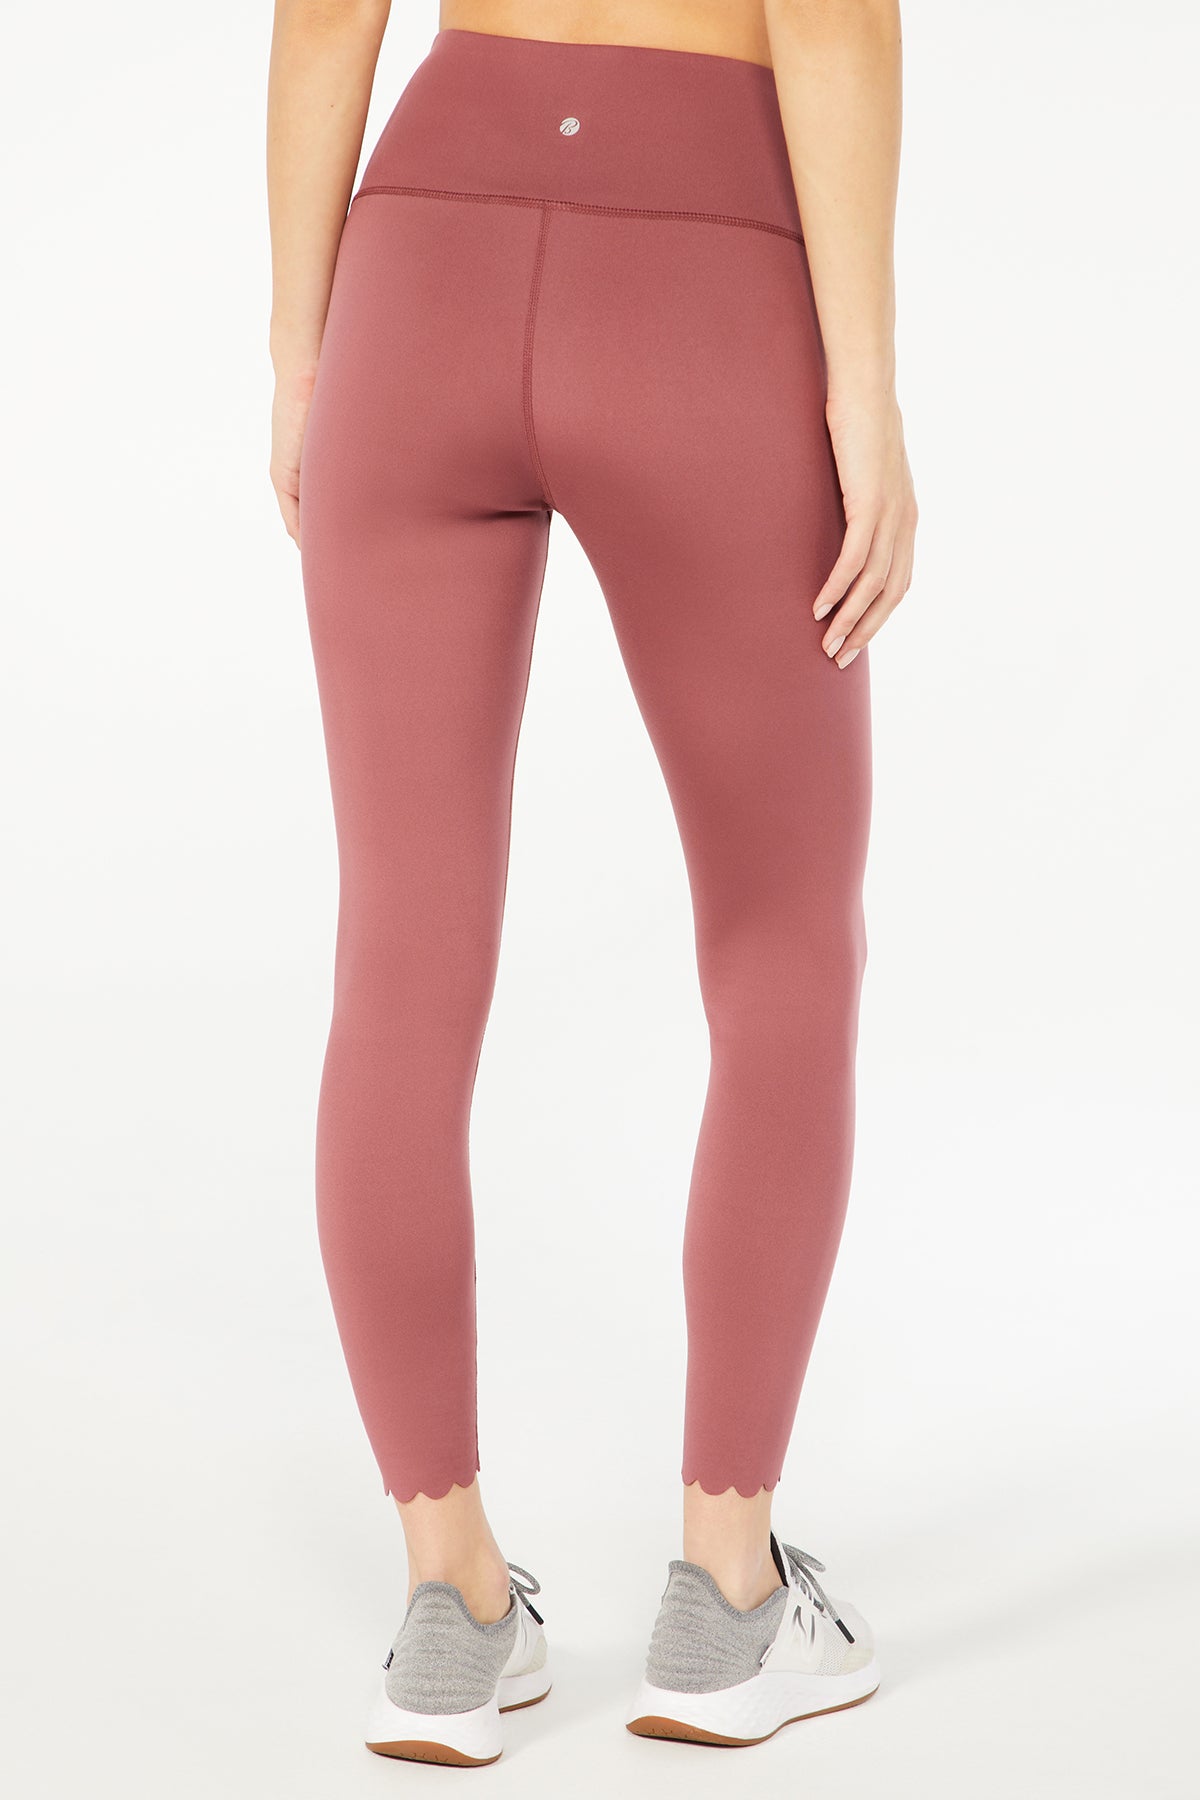 Scallop Legging (Crushed Berry)